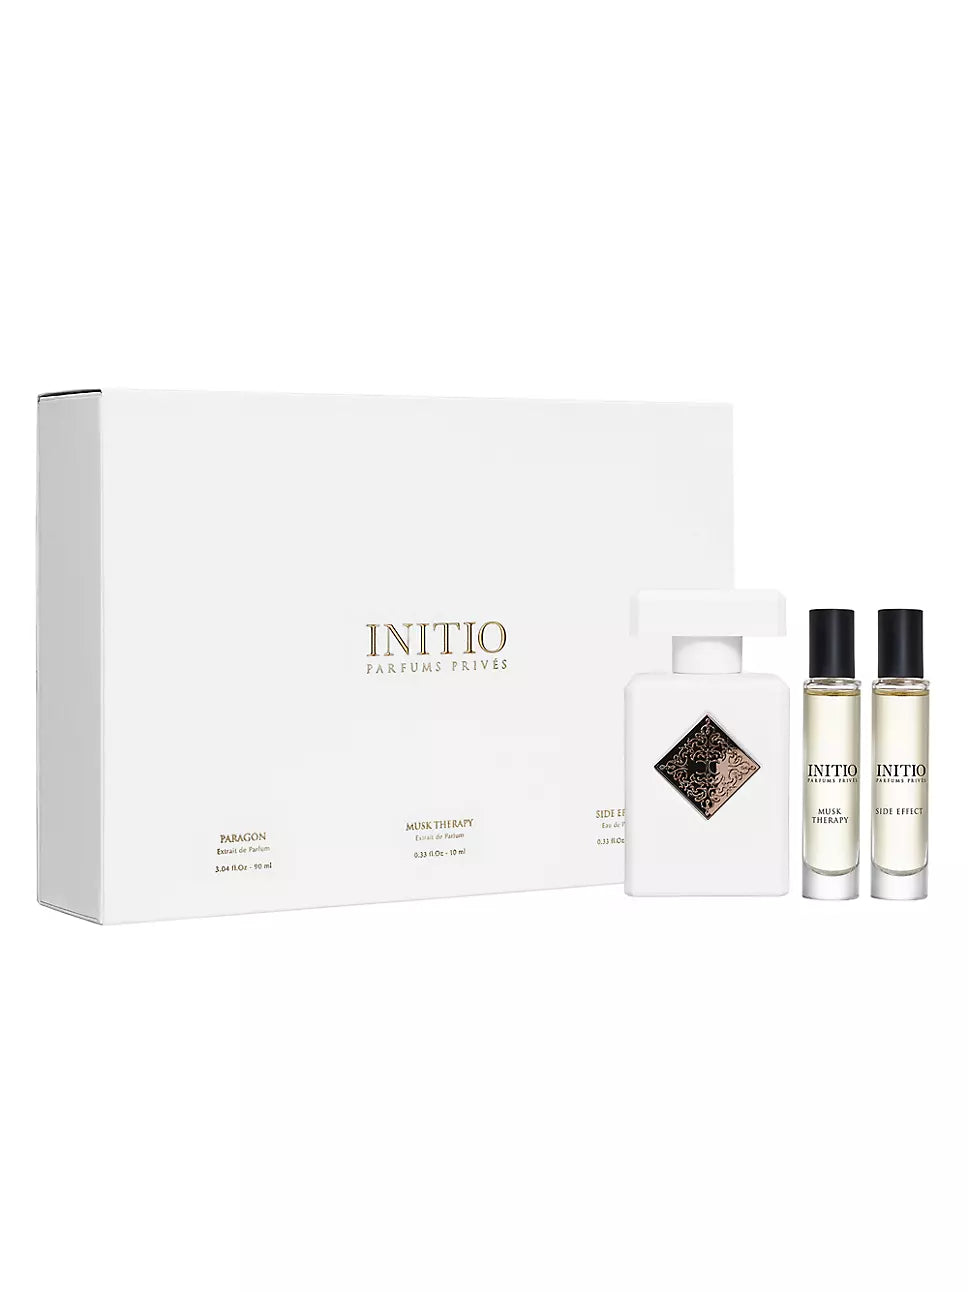 Initio Musk Therapy Paragon Set